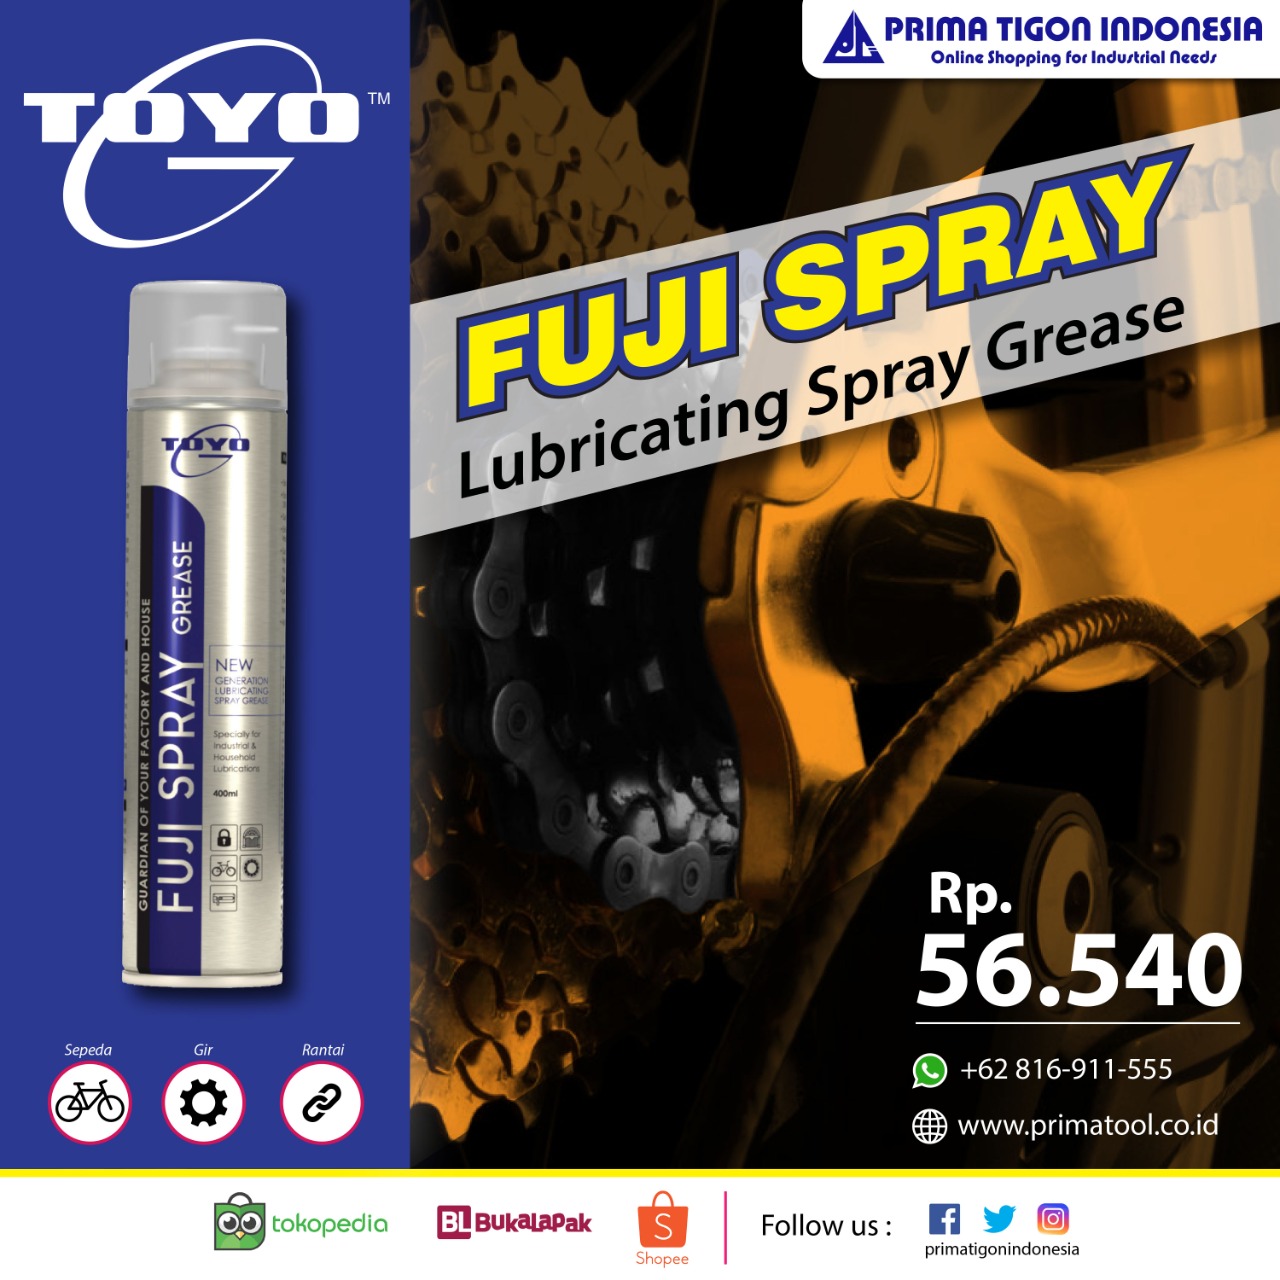 Lubricating Spray Grease